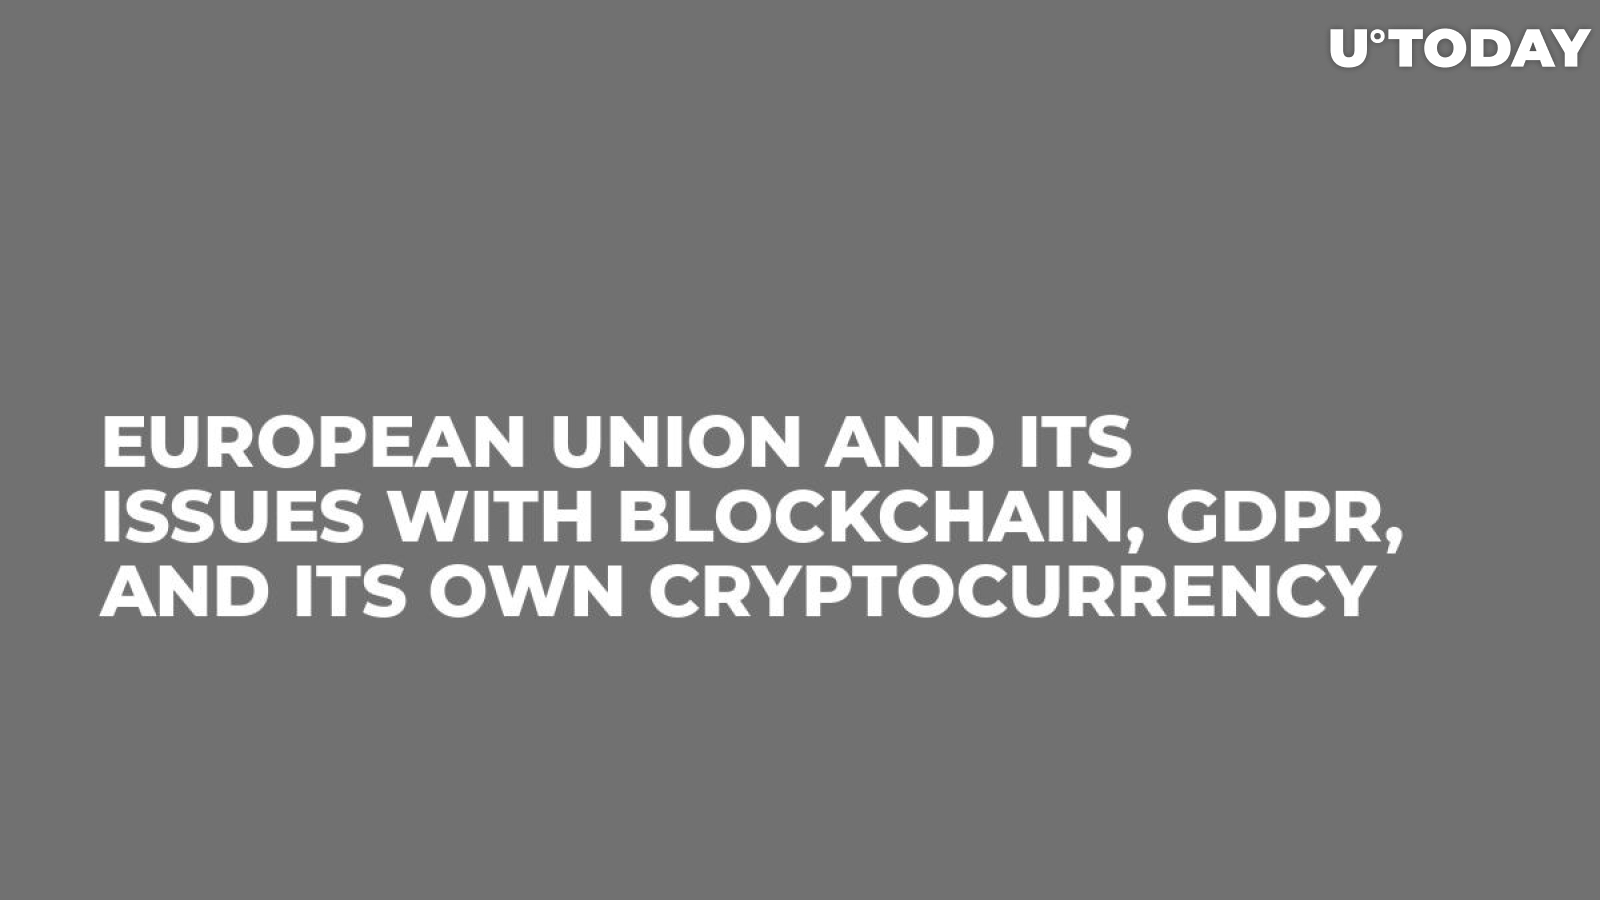 European Union and Its Issues With Blockchain, GDPR, and Its Own Cryptocurrency